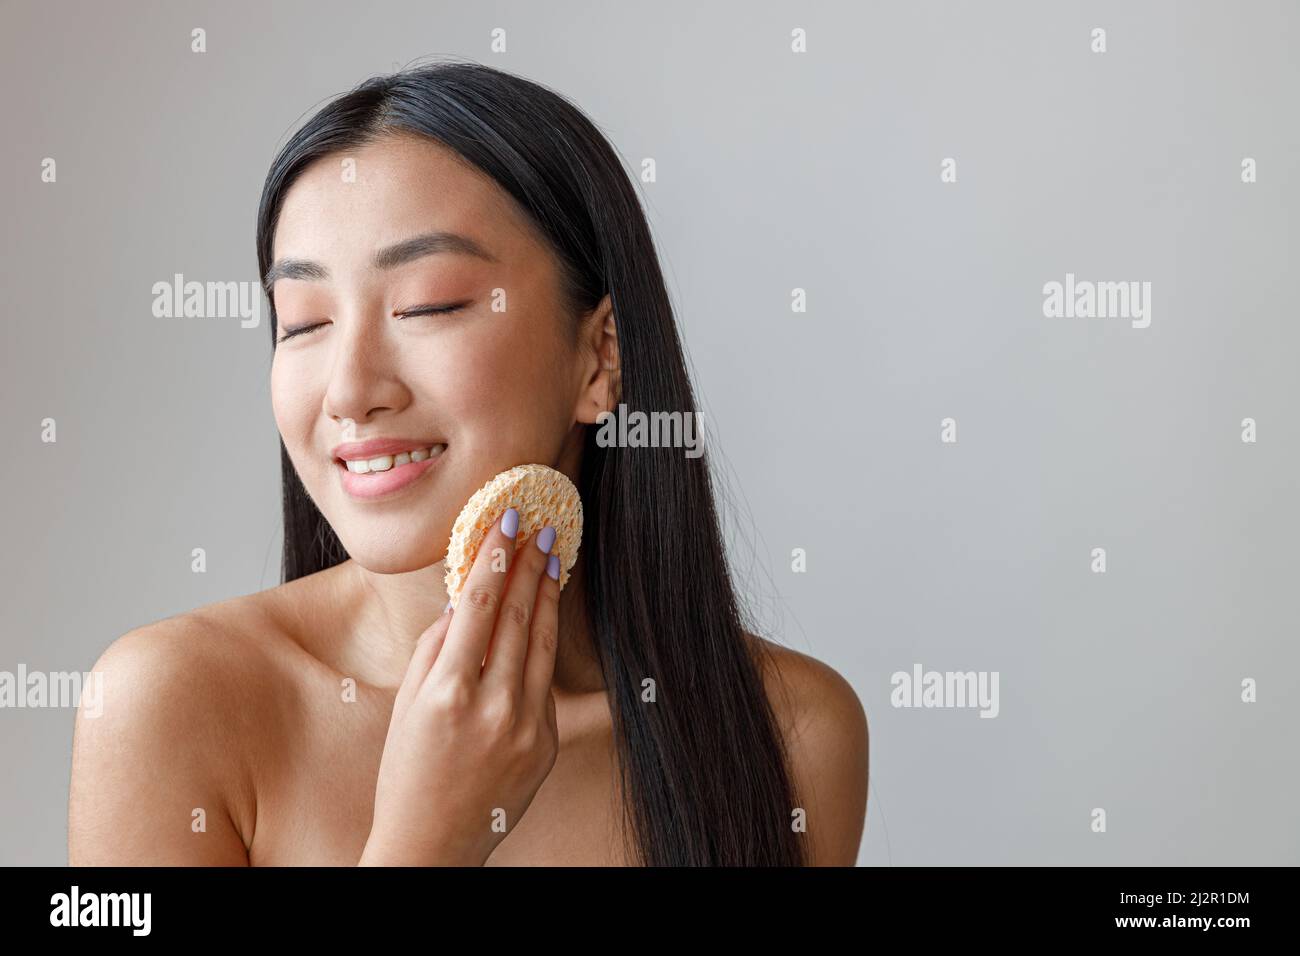 Joyful Asian woman cleaning face with cosmetic sponge Stock Photo